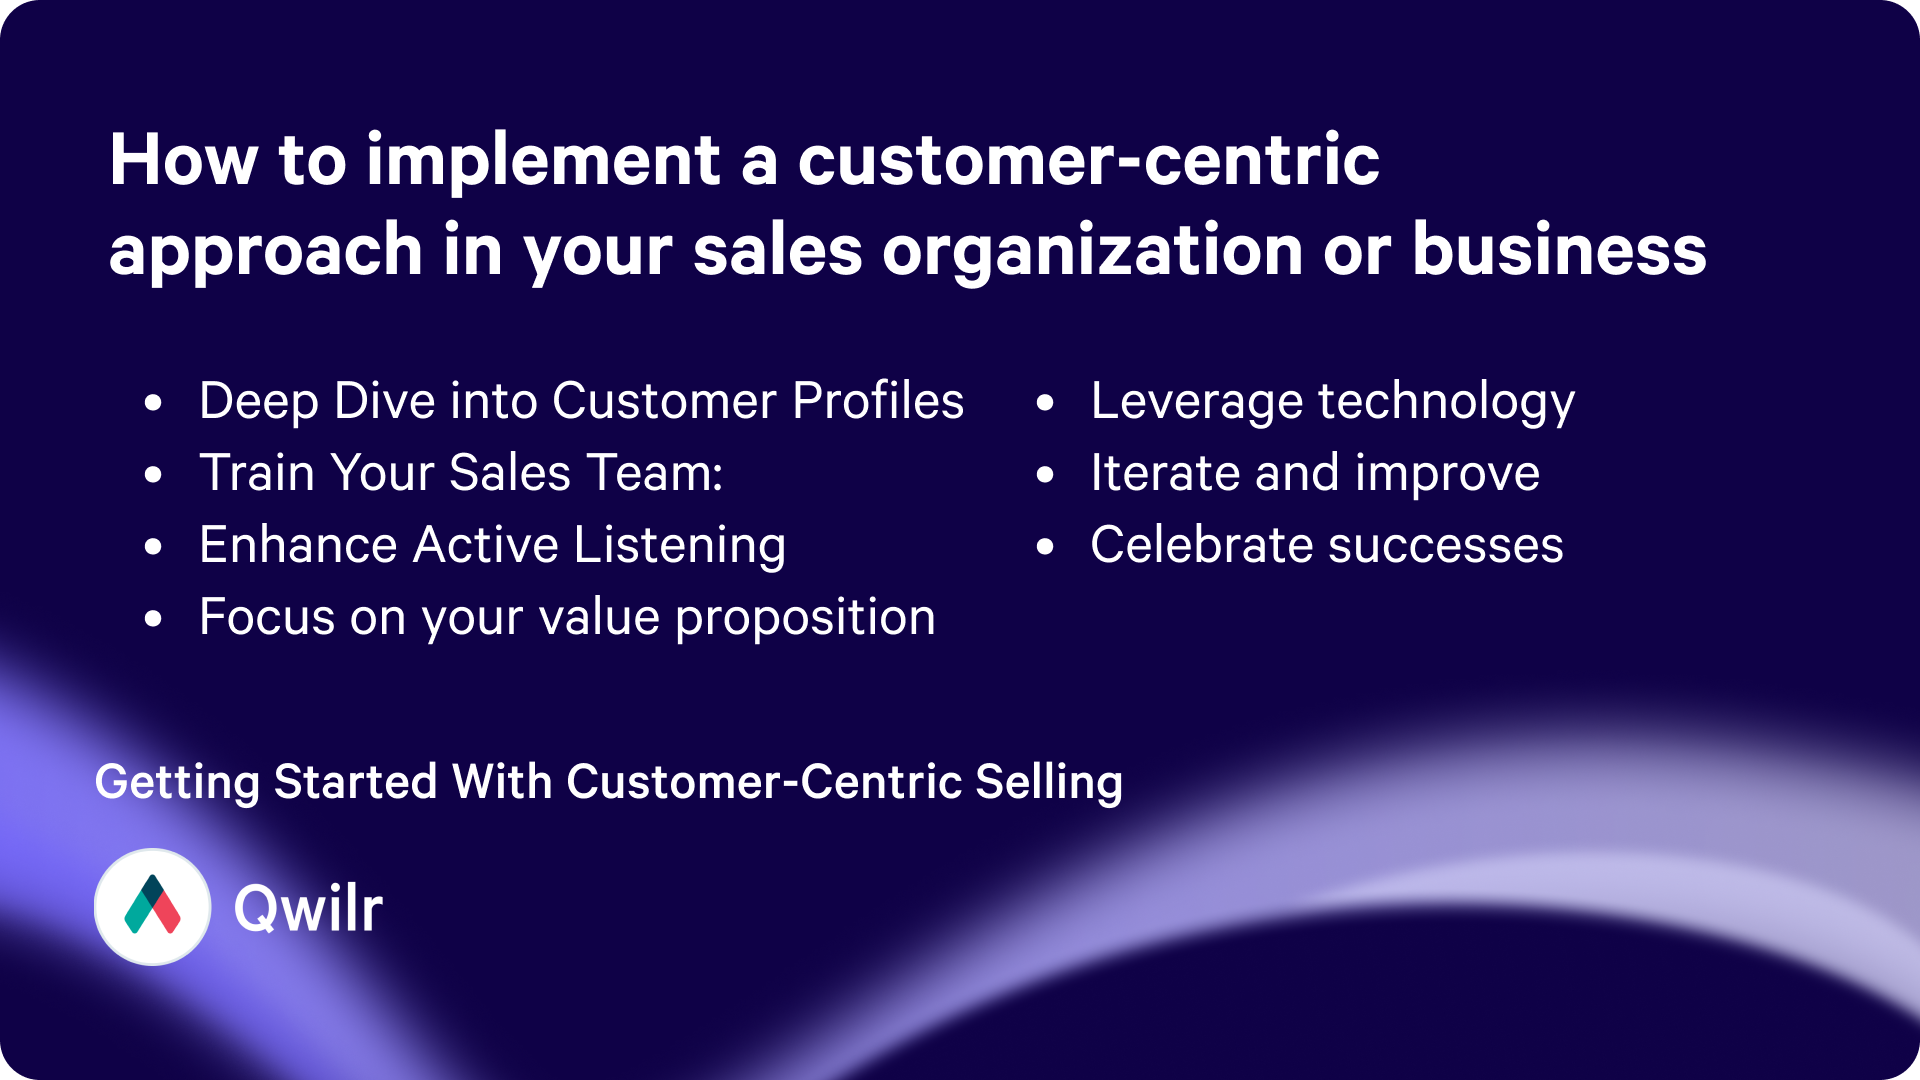 Summary of How to implement a customer-centric approach in your sales organization or business.